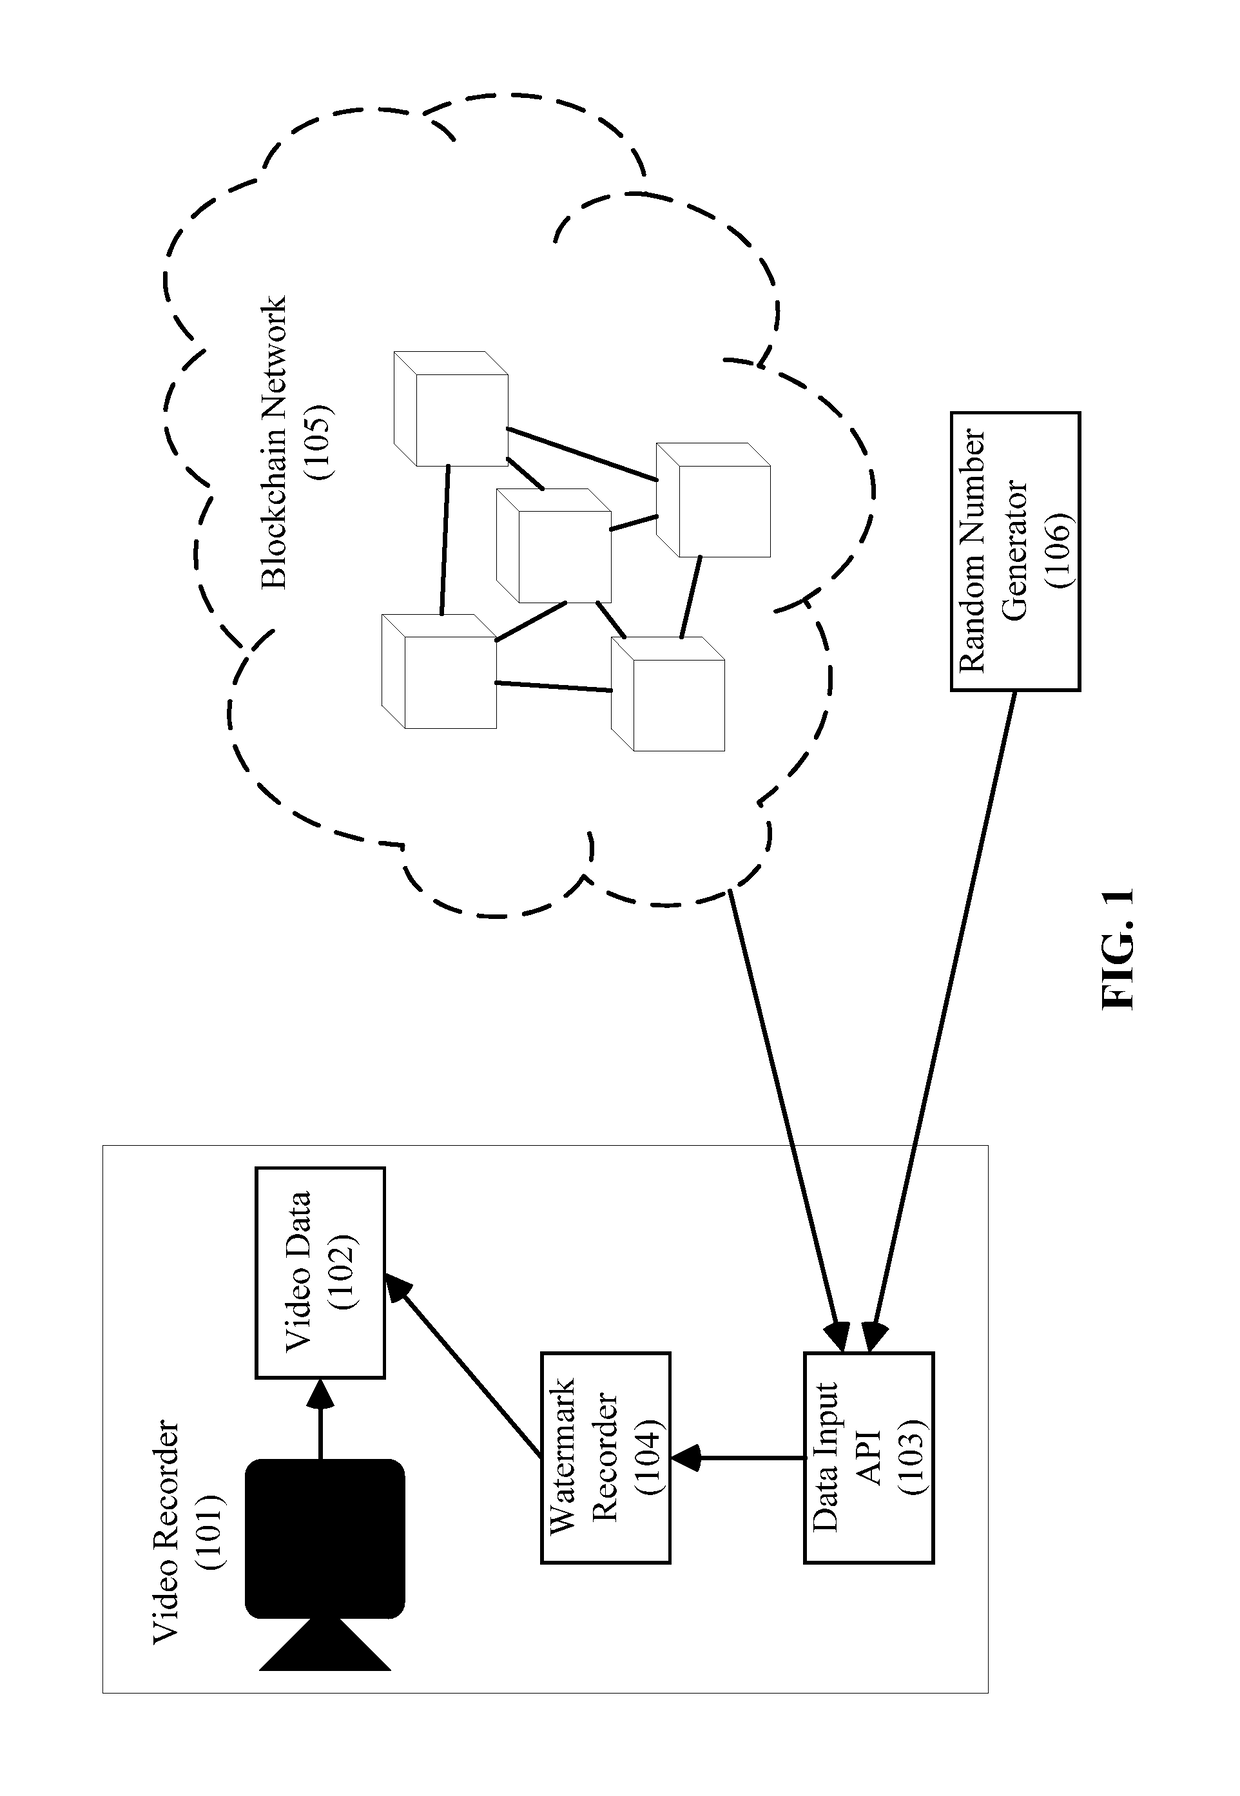 Systems and methods for authenticating video using watermarks